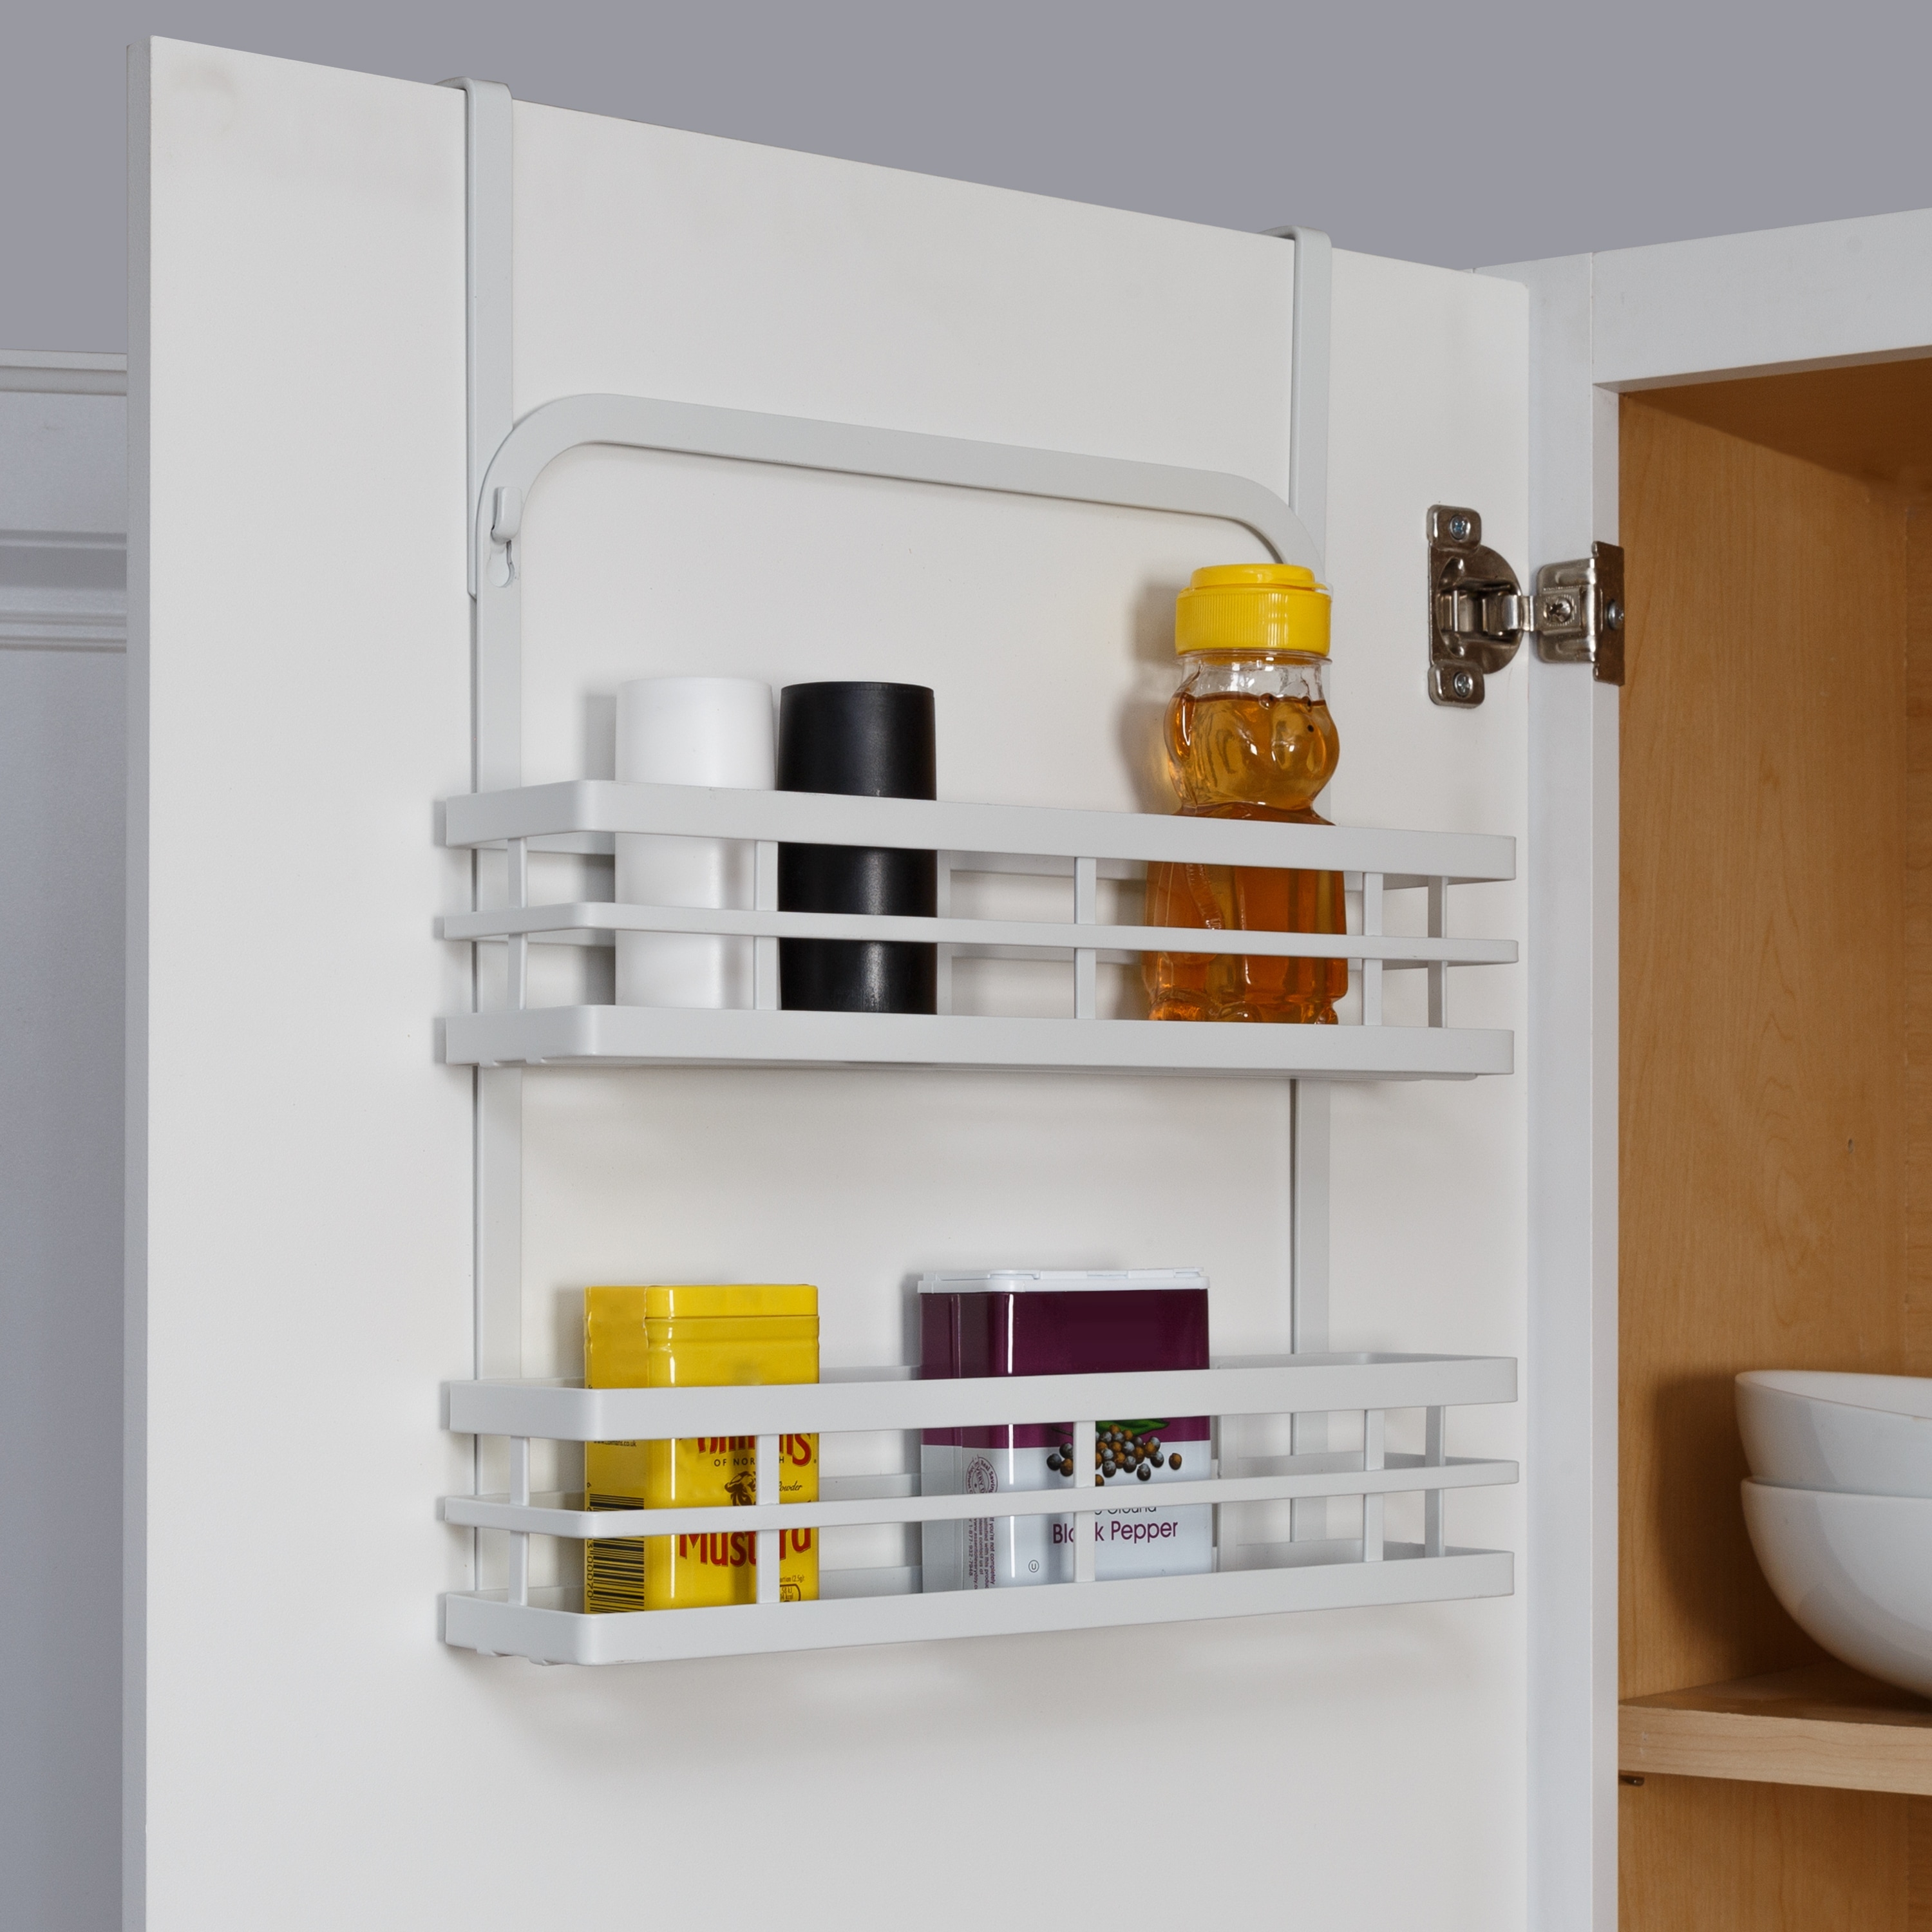 https://ak1.ostkcdn.com/images/products/is/images/direct/1e0759c13e9acef20c042dd7a73da54c5ff96f3e/White-Steel-Hanging-2-Tier-Spice-Rack.jpg